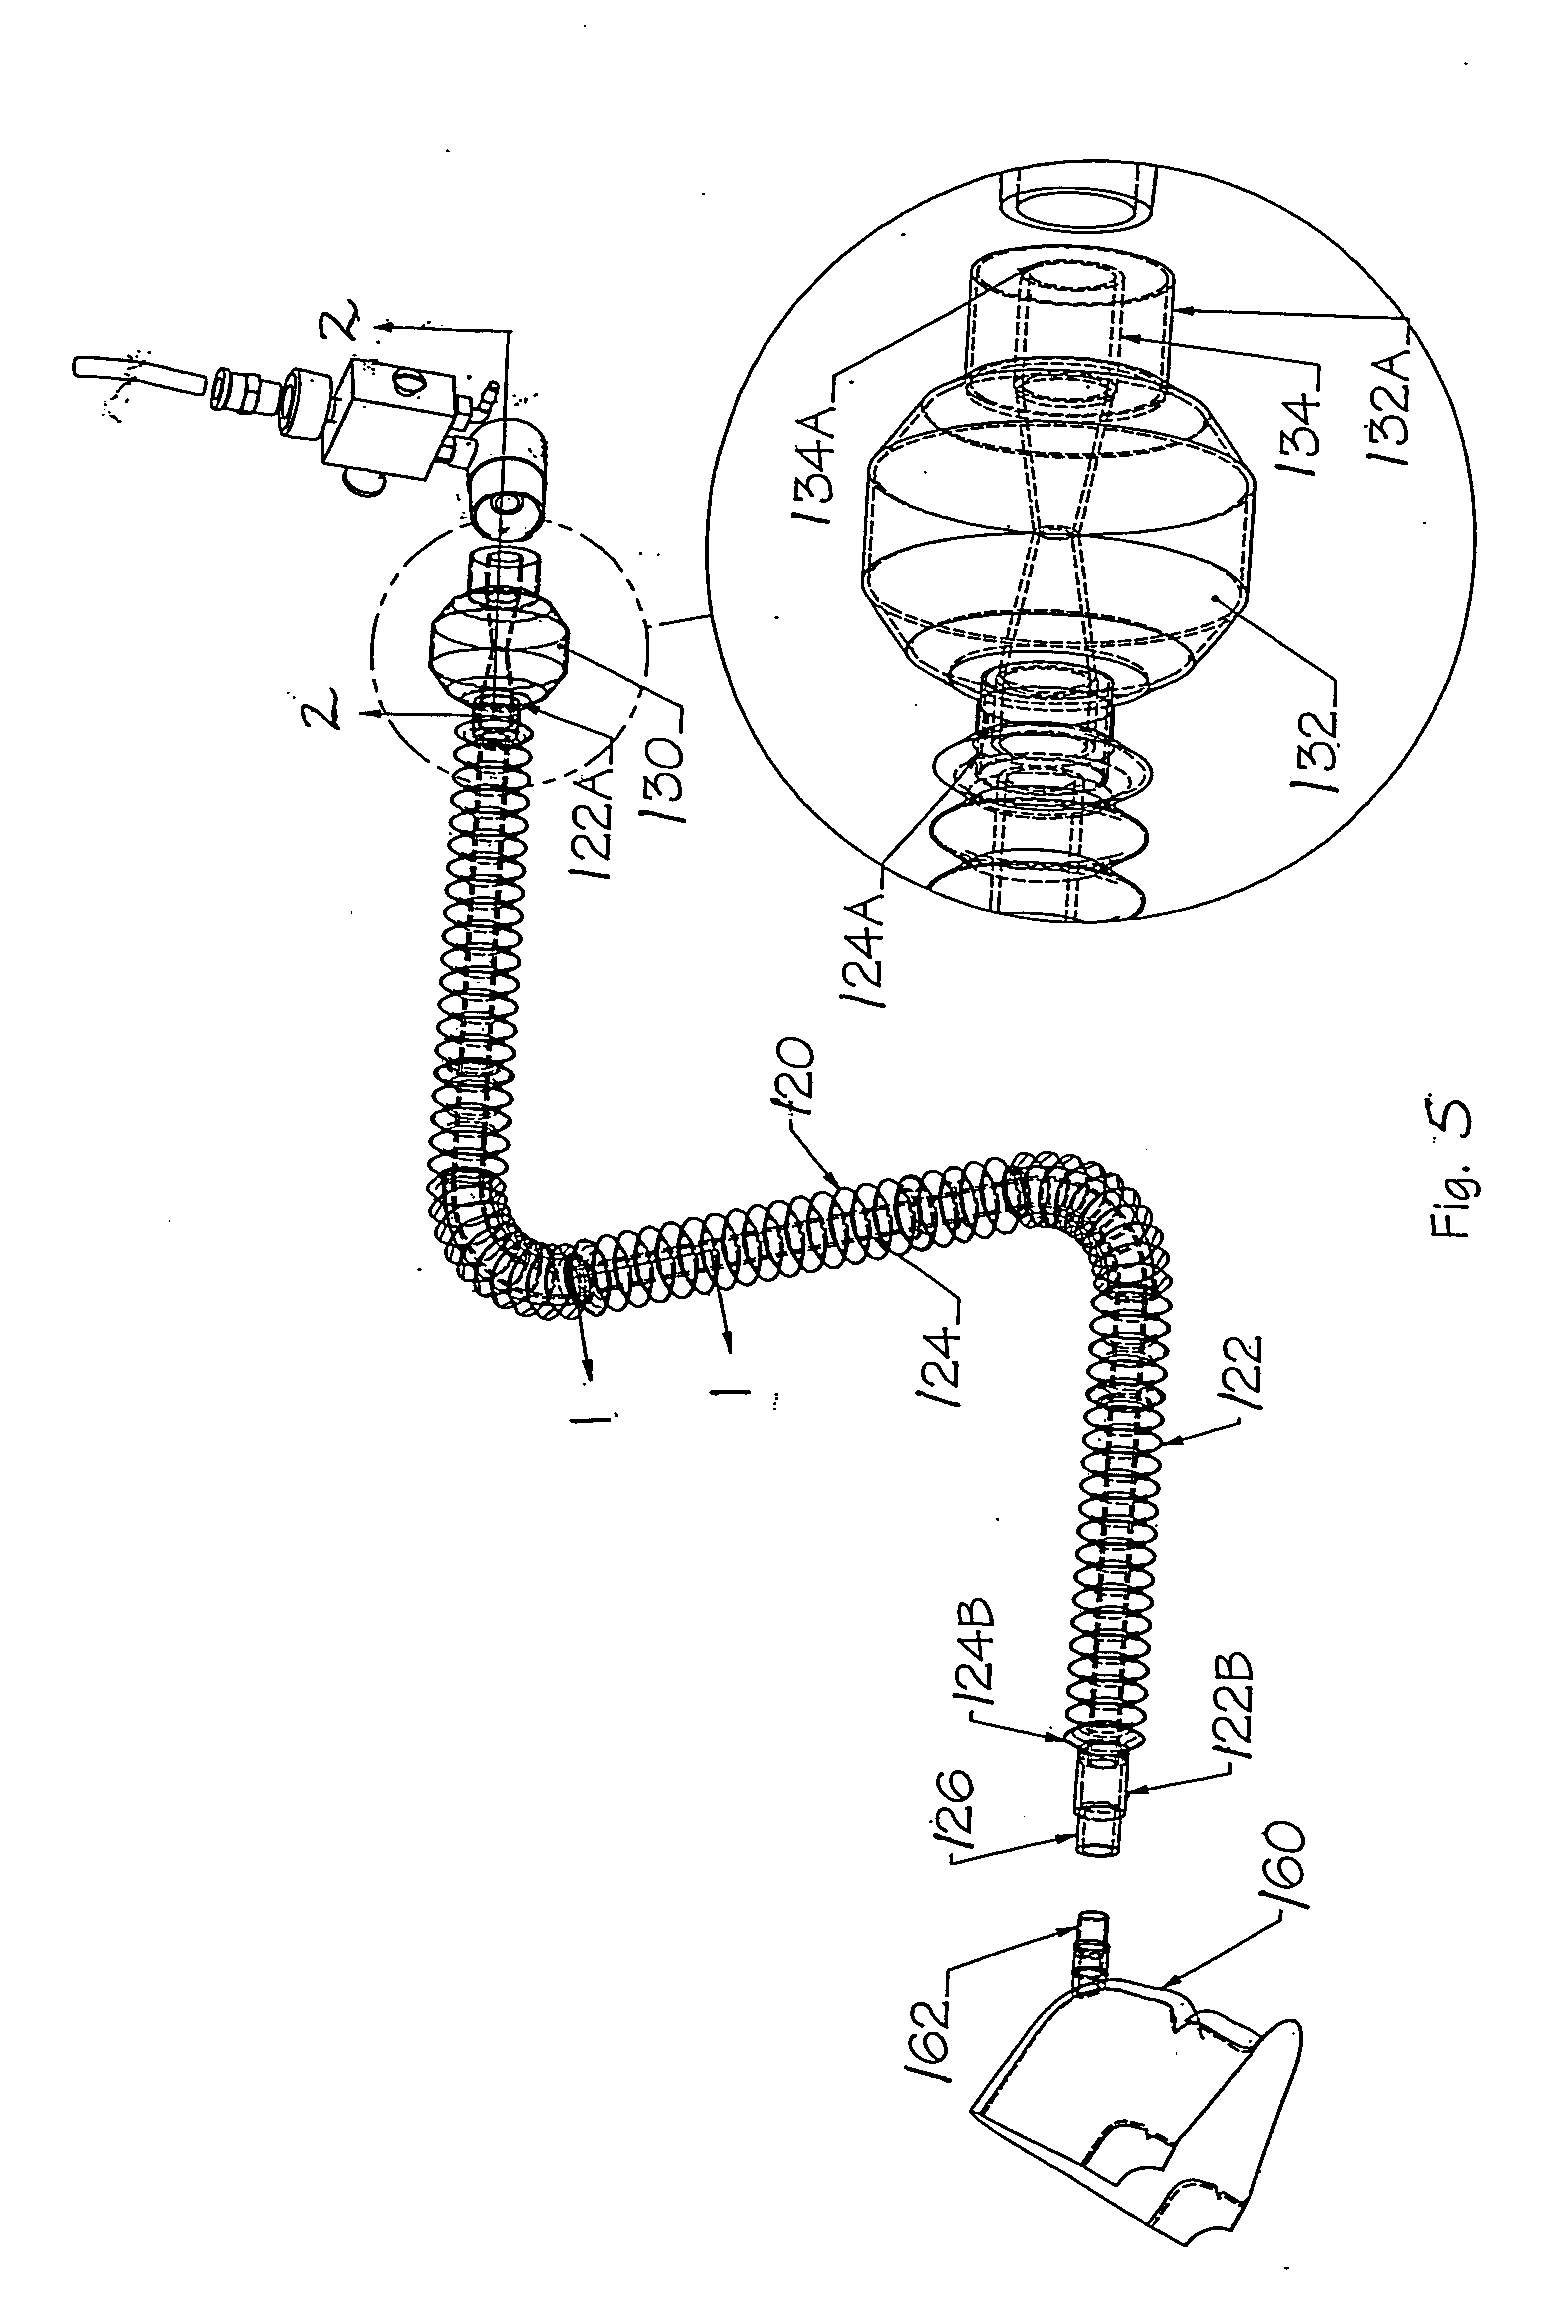 Apparatus and method for humidification of inspired gases